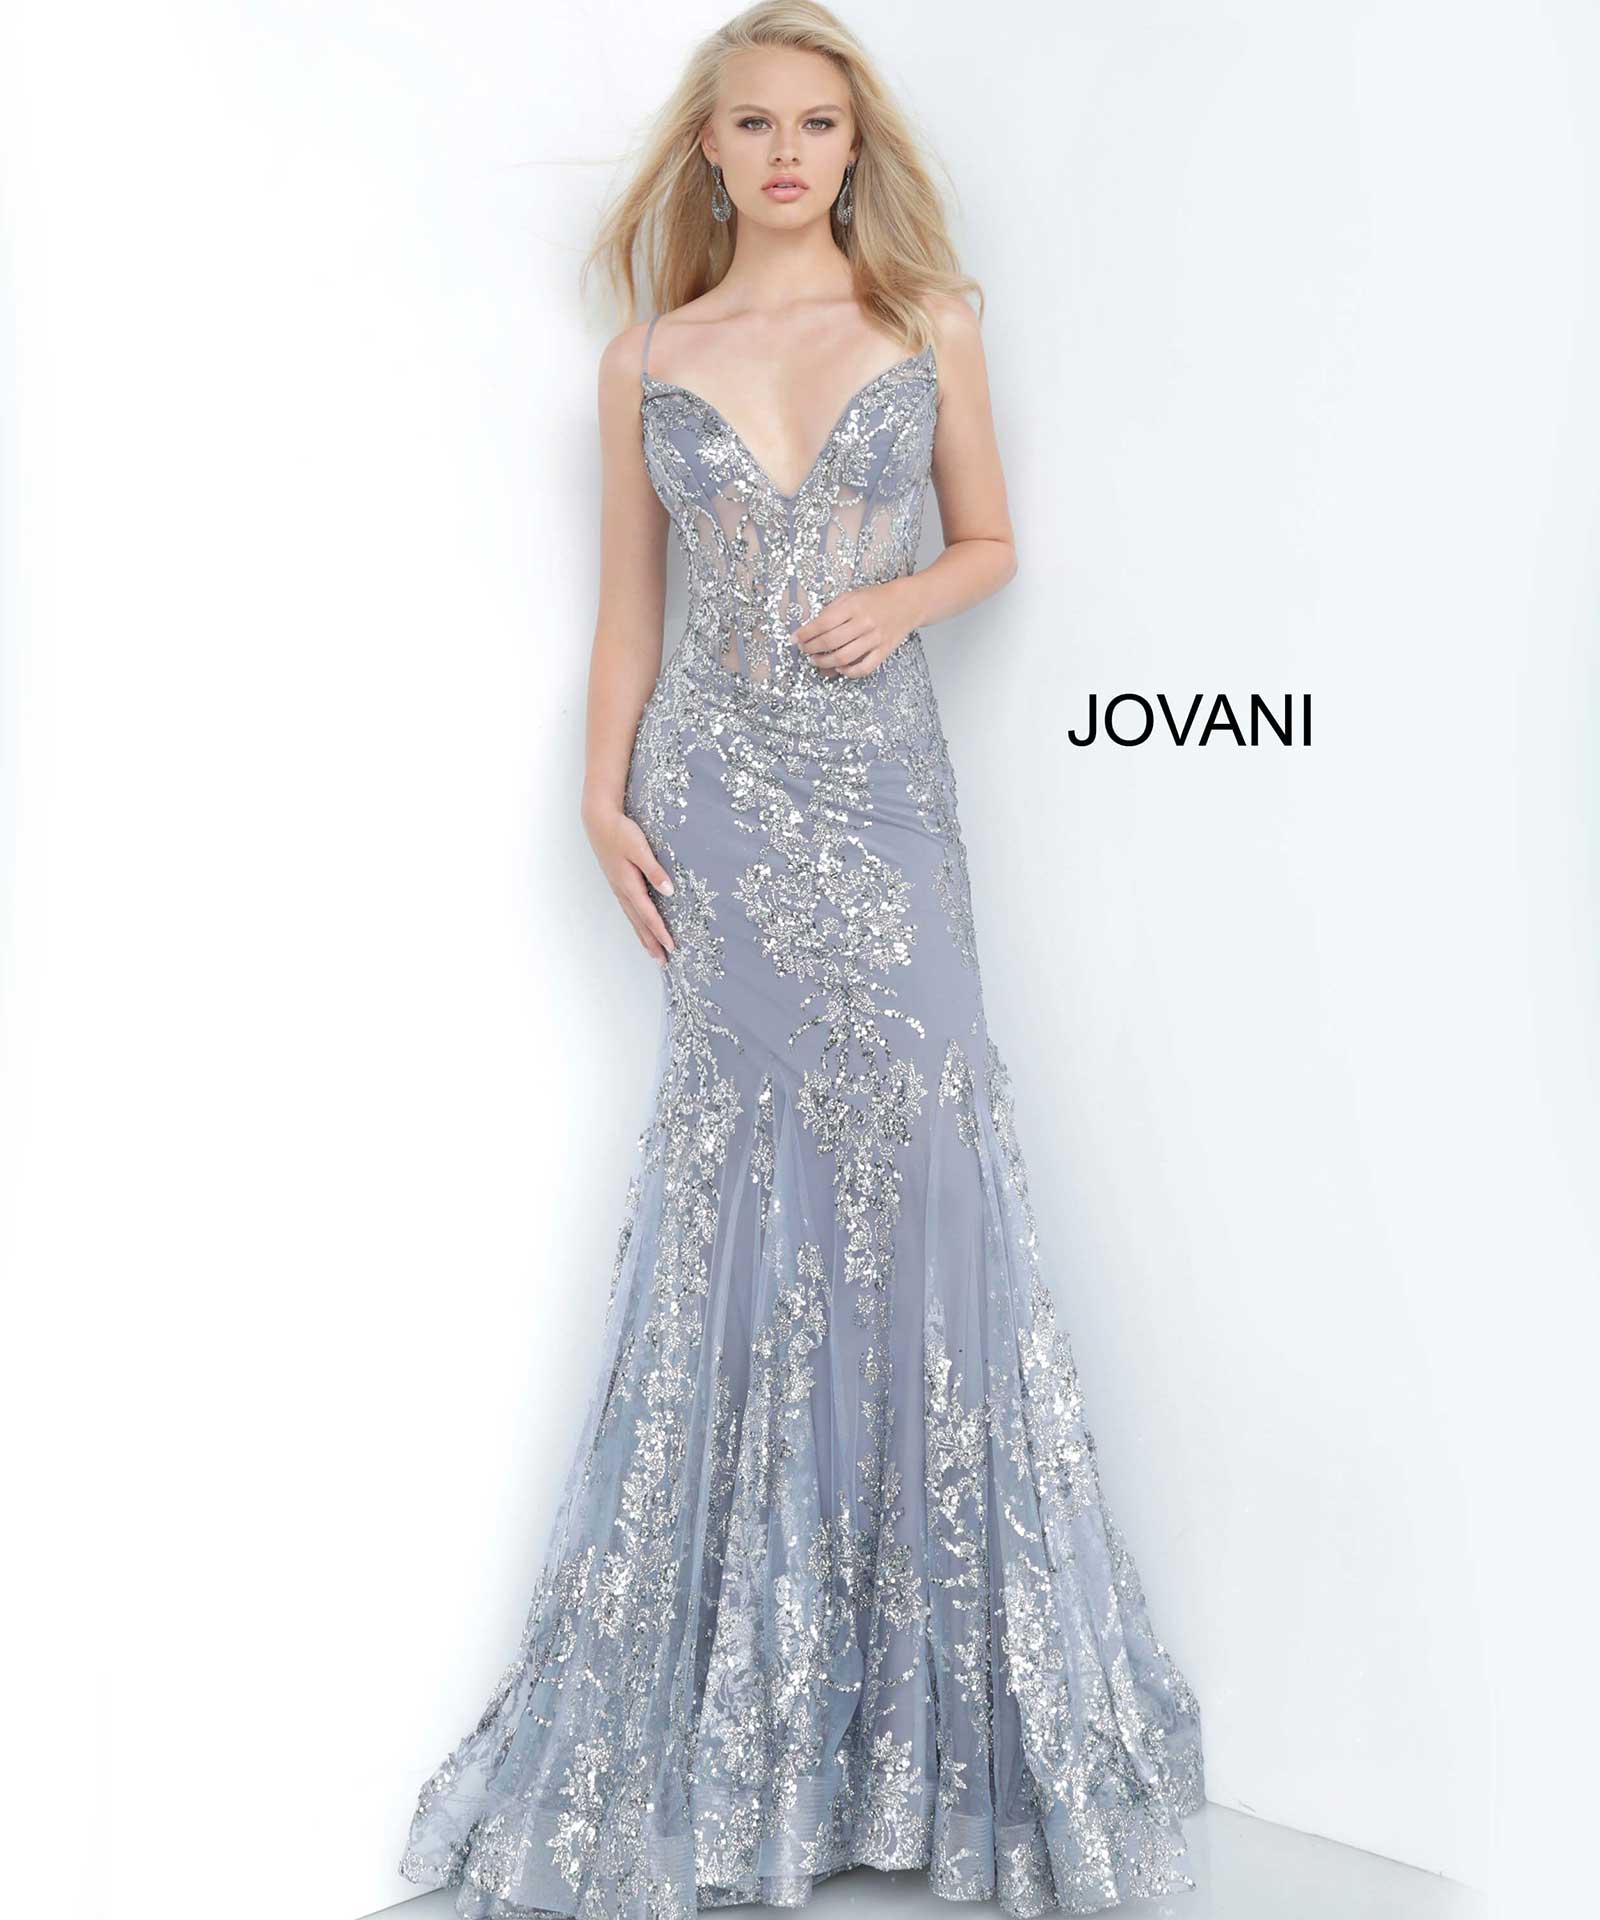 Prom and Ball Dresses from Jovani | Formal Wear at Azalea Boutique